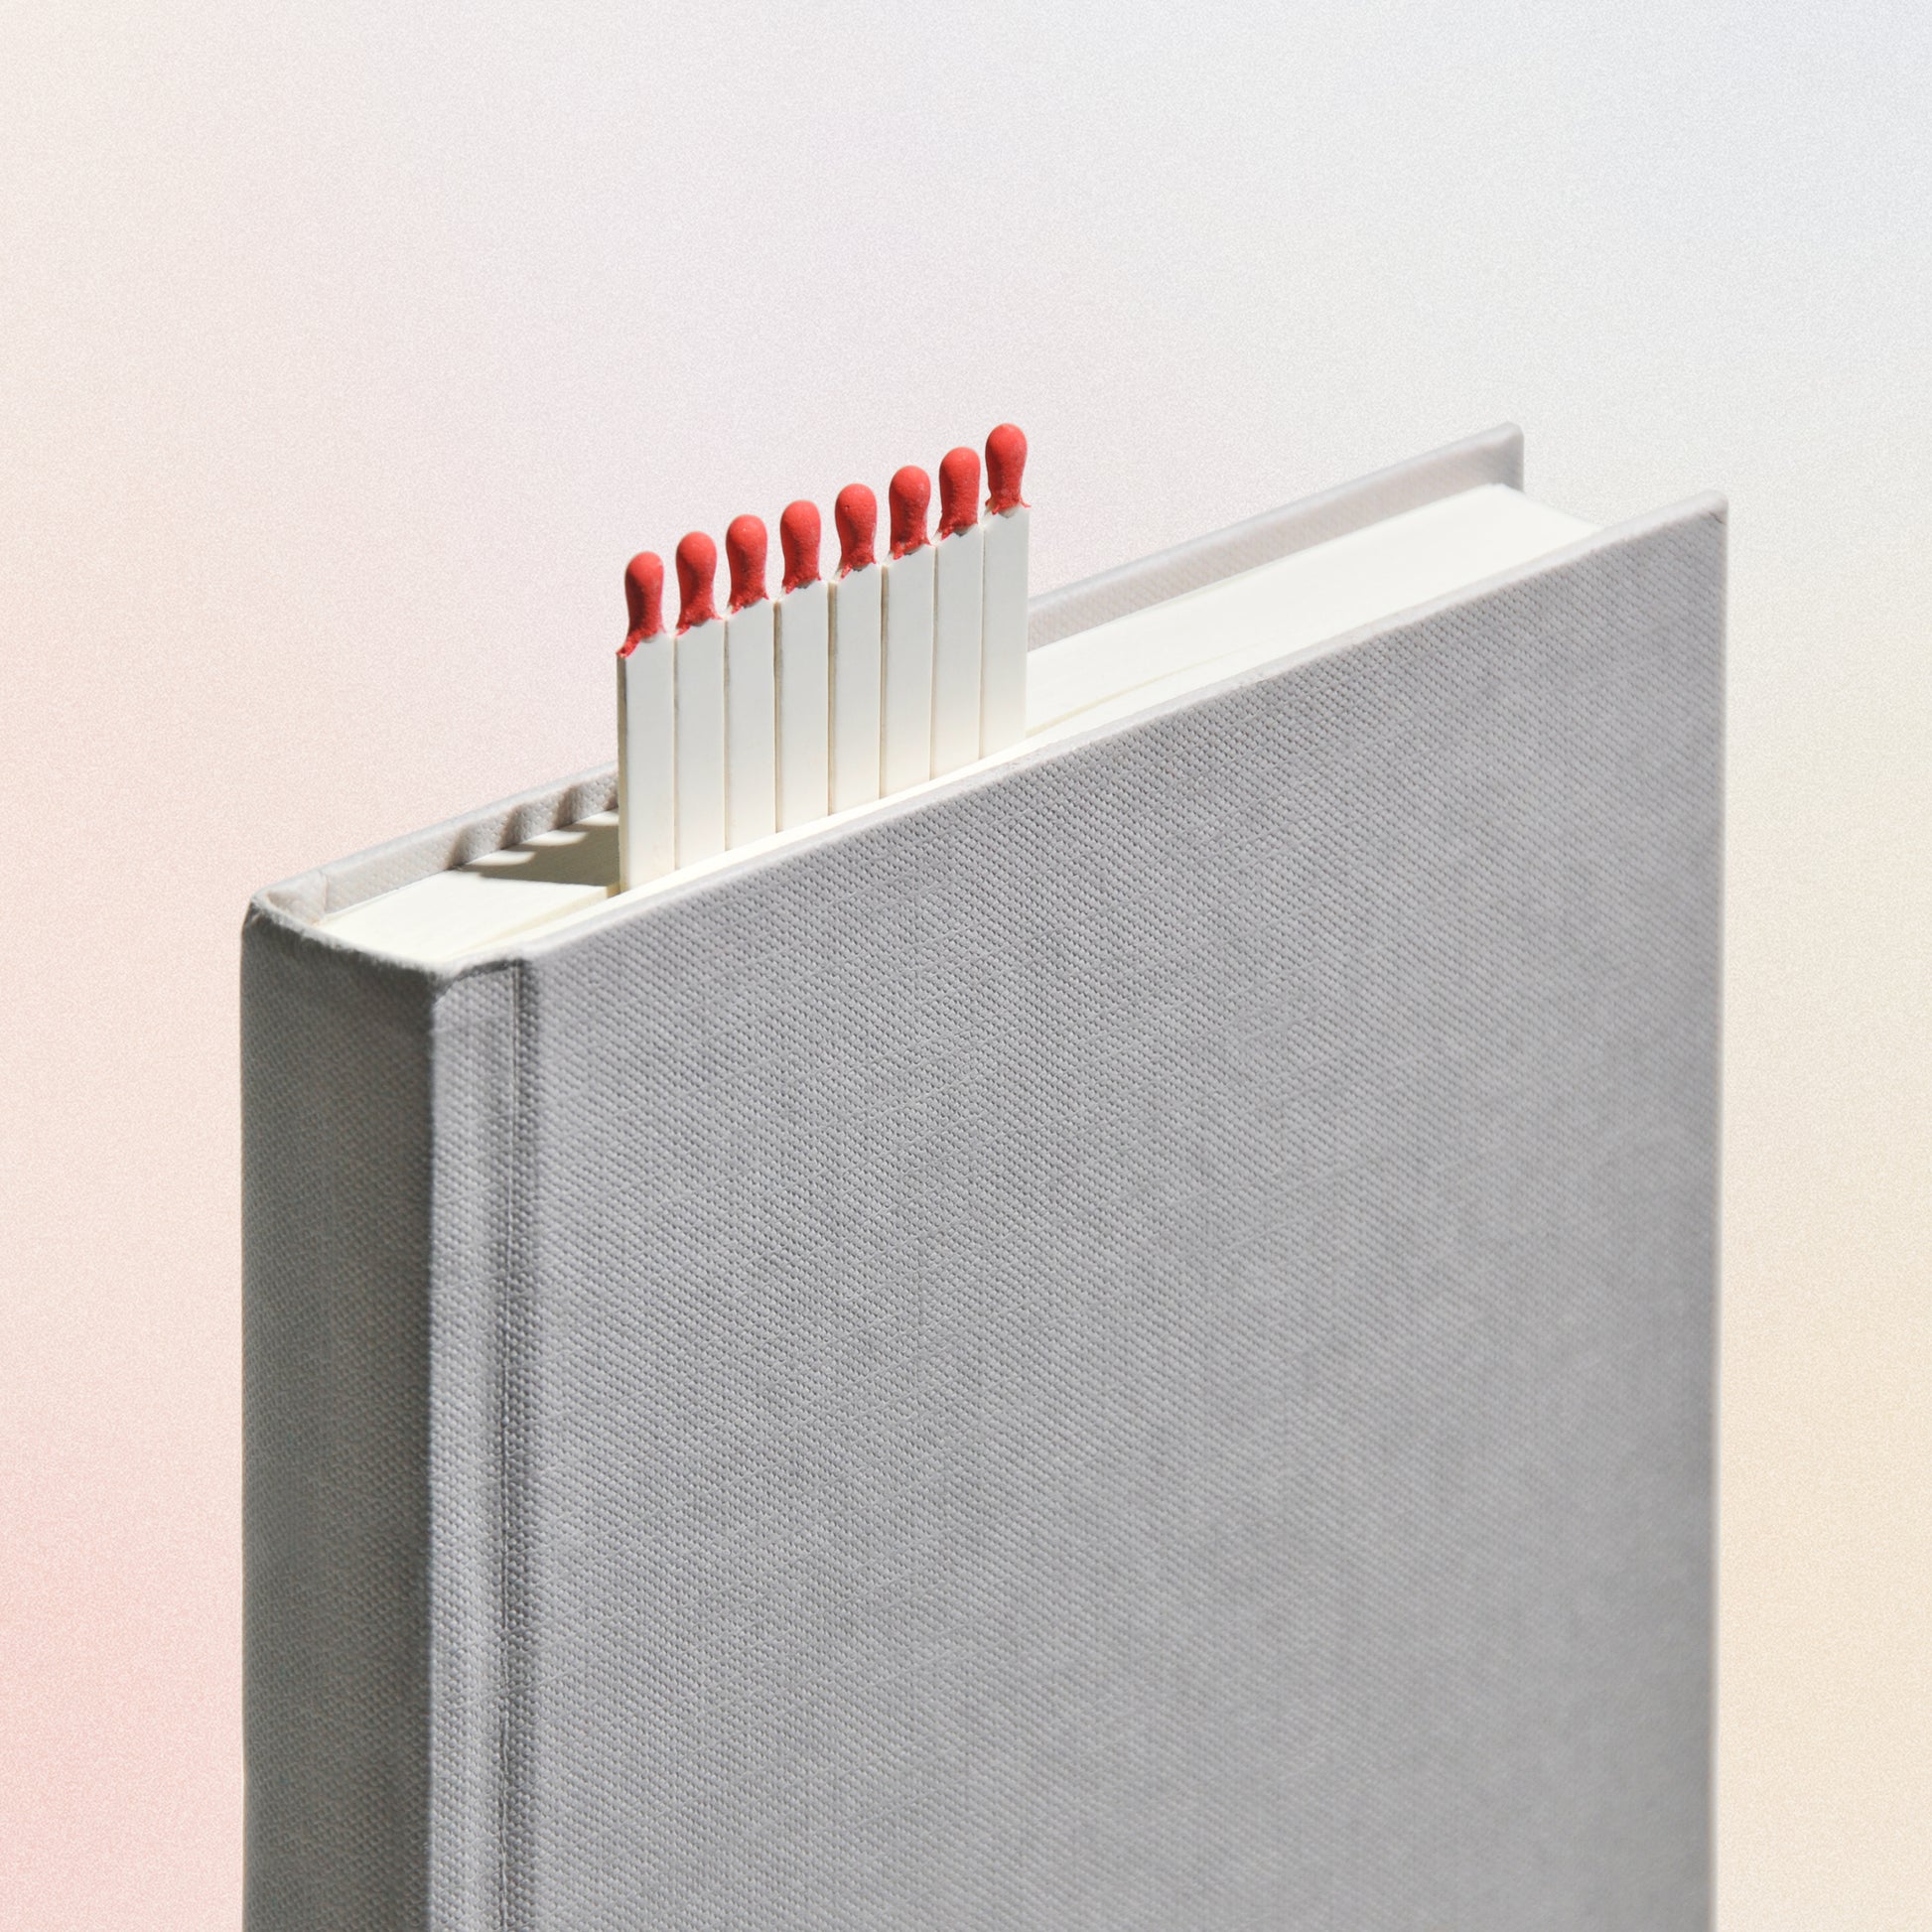 bookmark with removable matches inside a book